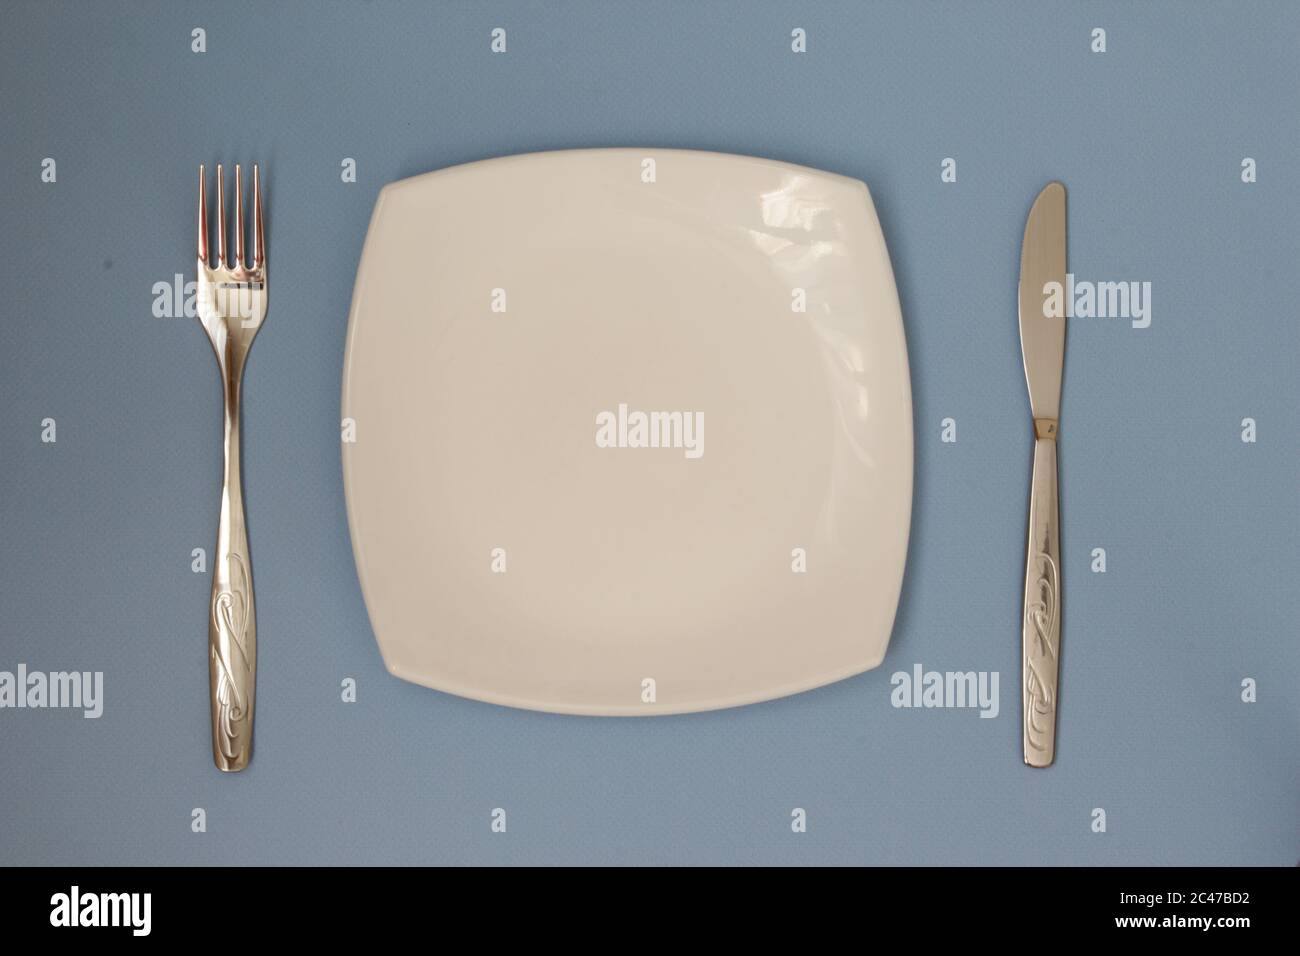 Empty plate, fork and knife over blue background. Clean plate and cutlery on light background. Top view. Flat lay. Stock Photo